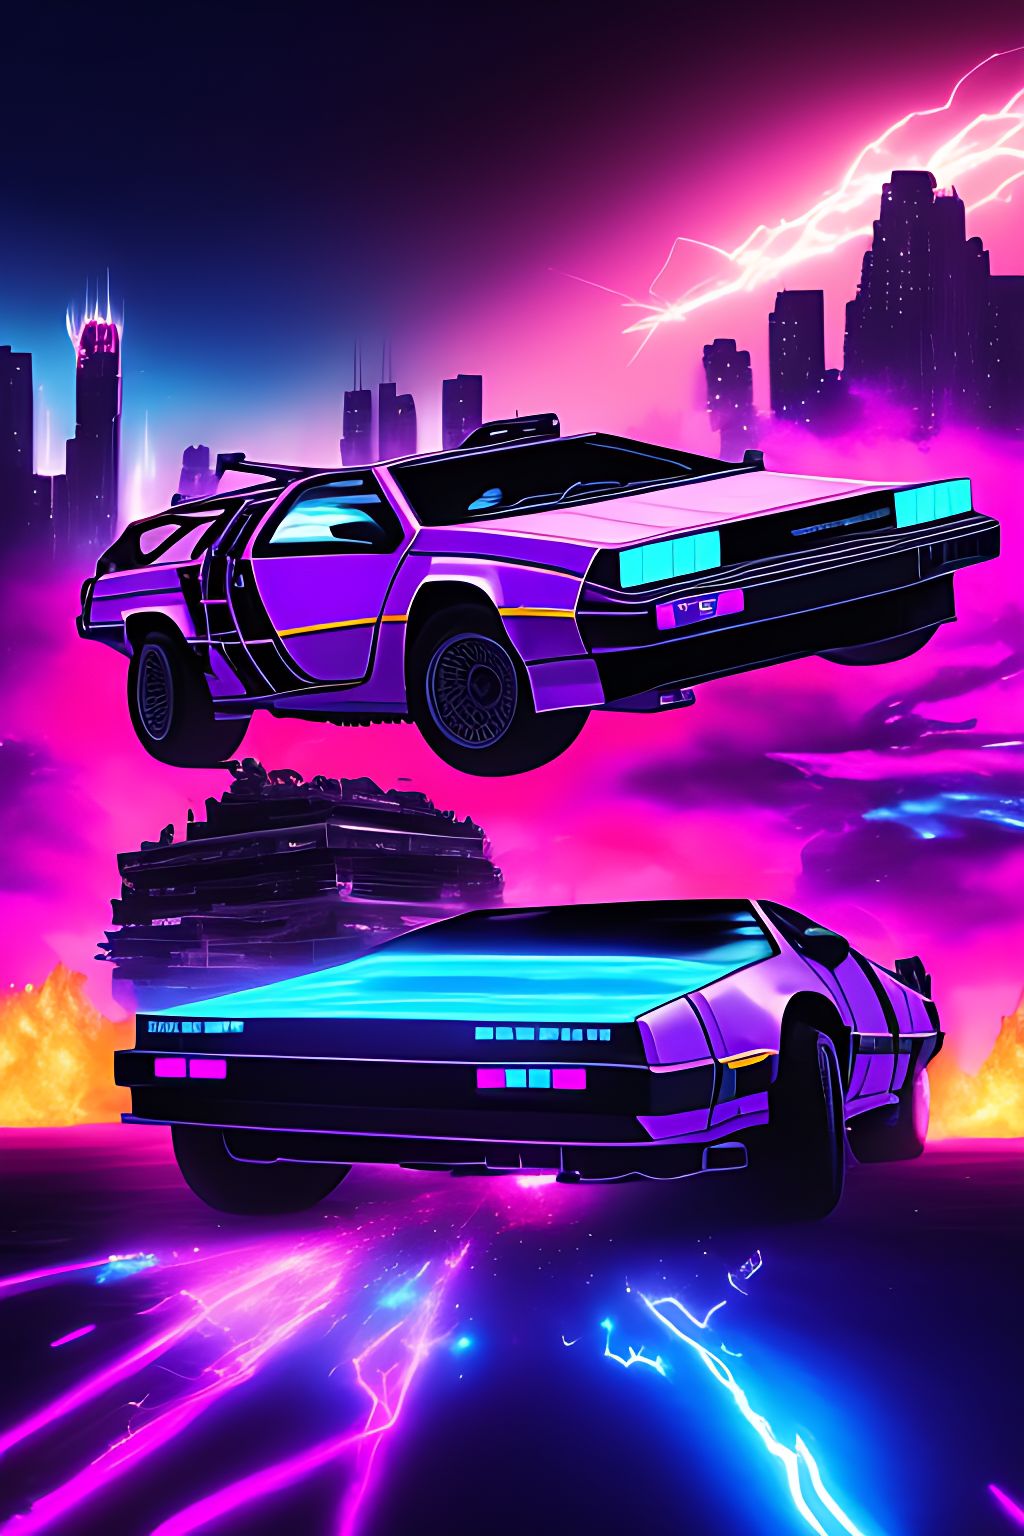 dark purple neon delorean cars with huge boombox speakers firing visible sonic boom waves  racing scene with action fighting scene shoot sonic wave boom at the tower of babel in ruins on fire in the background split screen mecha voltron transformers mazinger z shogun warriors robots fighting each other in the sky transforming synthwave, synthwave cyberpunk